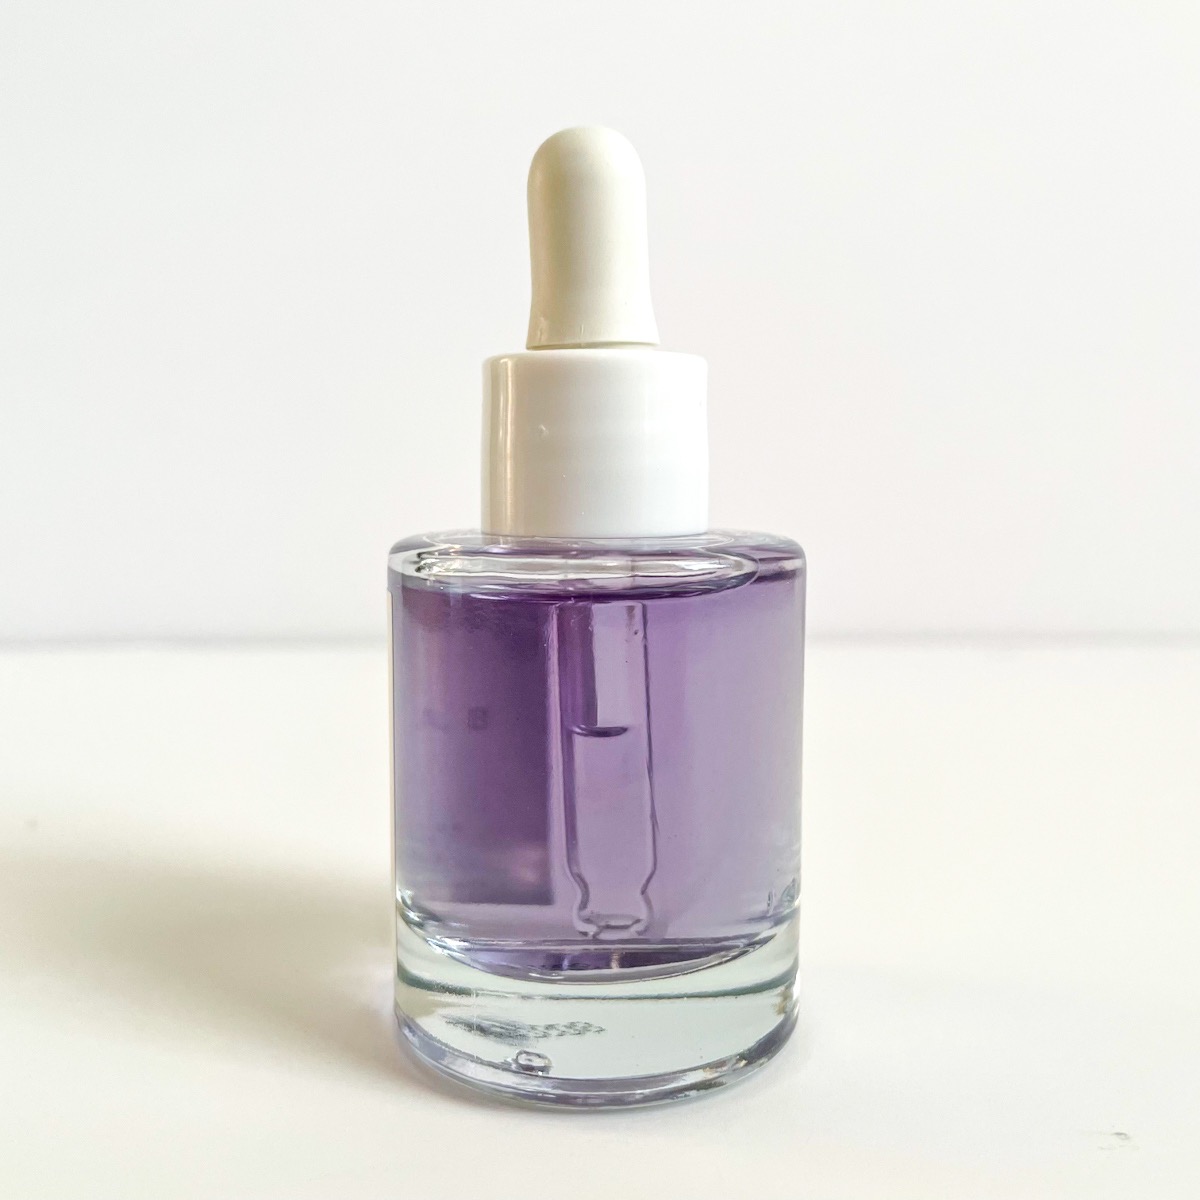 alternate view of clear glass bottle of purple serum